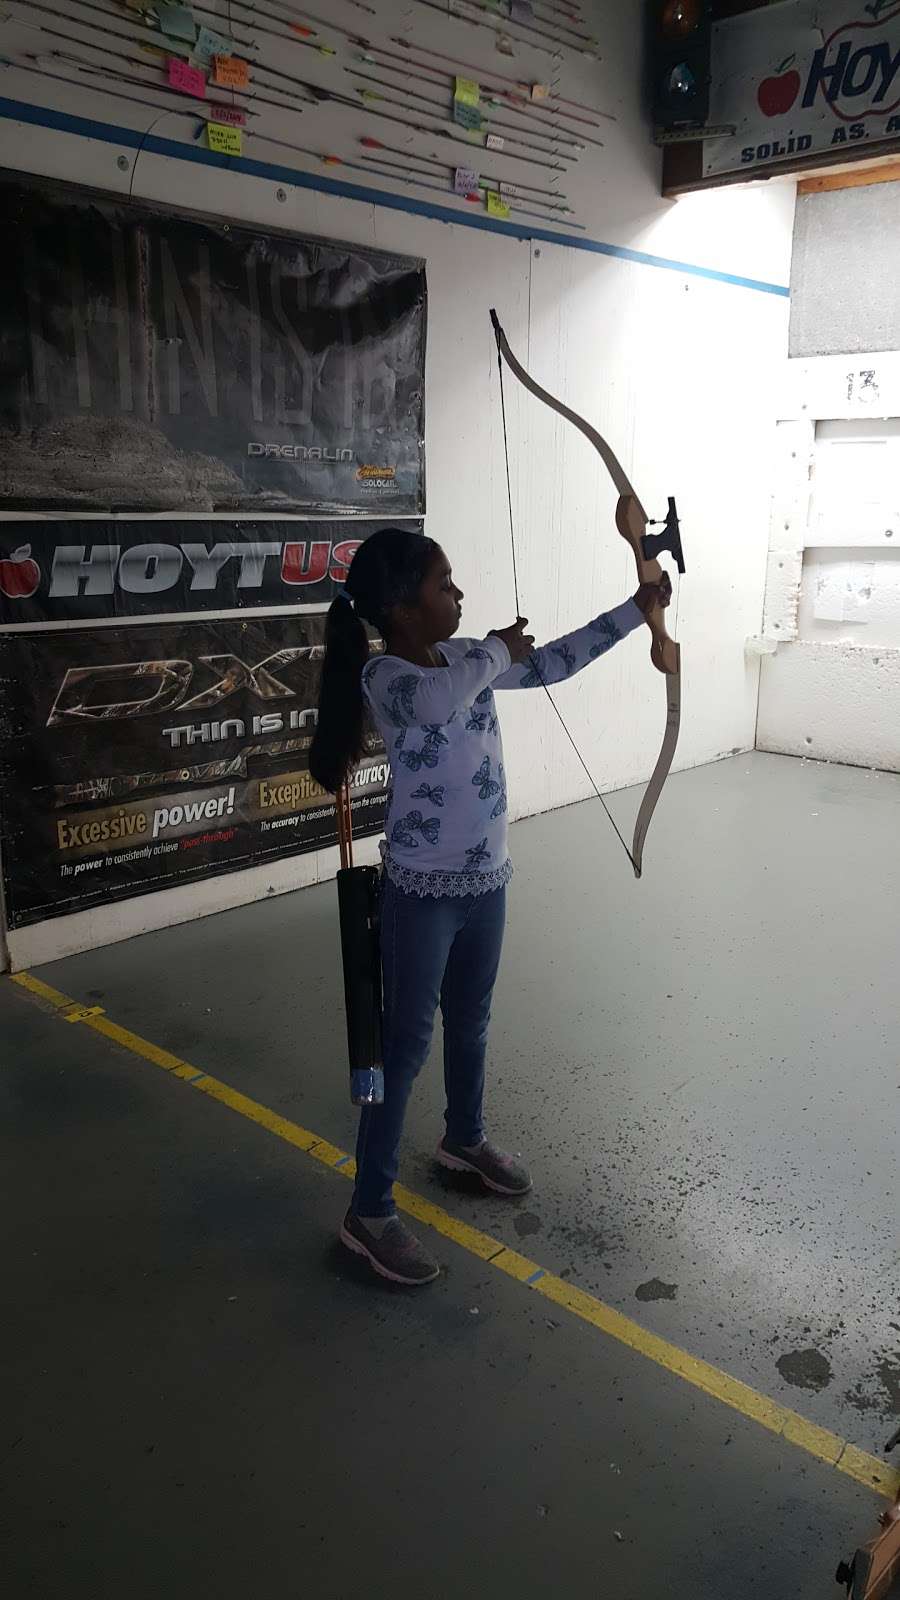 Queens Archery | 170-20 39th Ave, Flushing, NY 11358 | Phone: (718) 461-1756